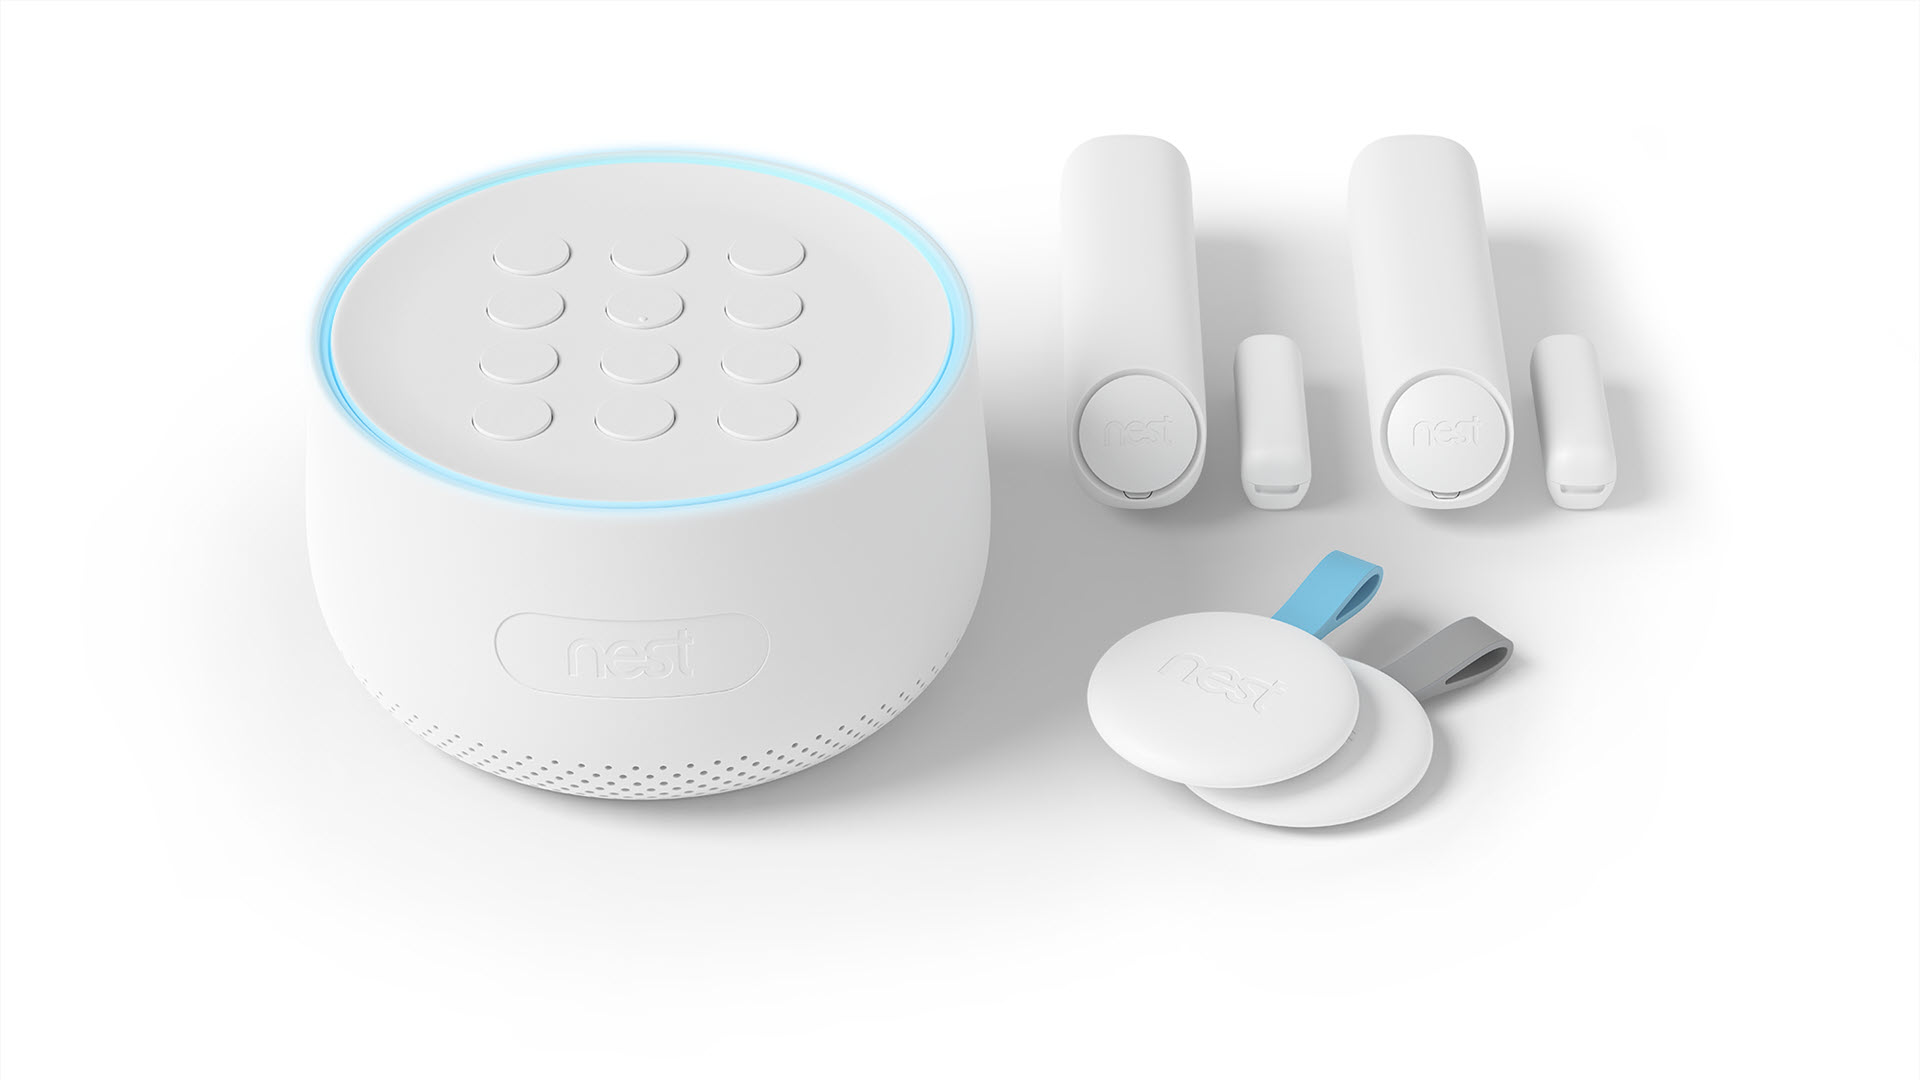 Google Discontinued the Nest Accurate Fear Plan With No Promised Alternative